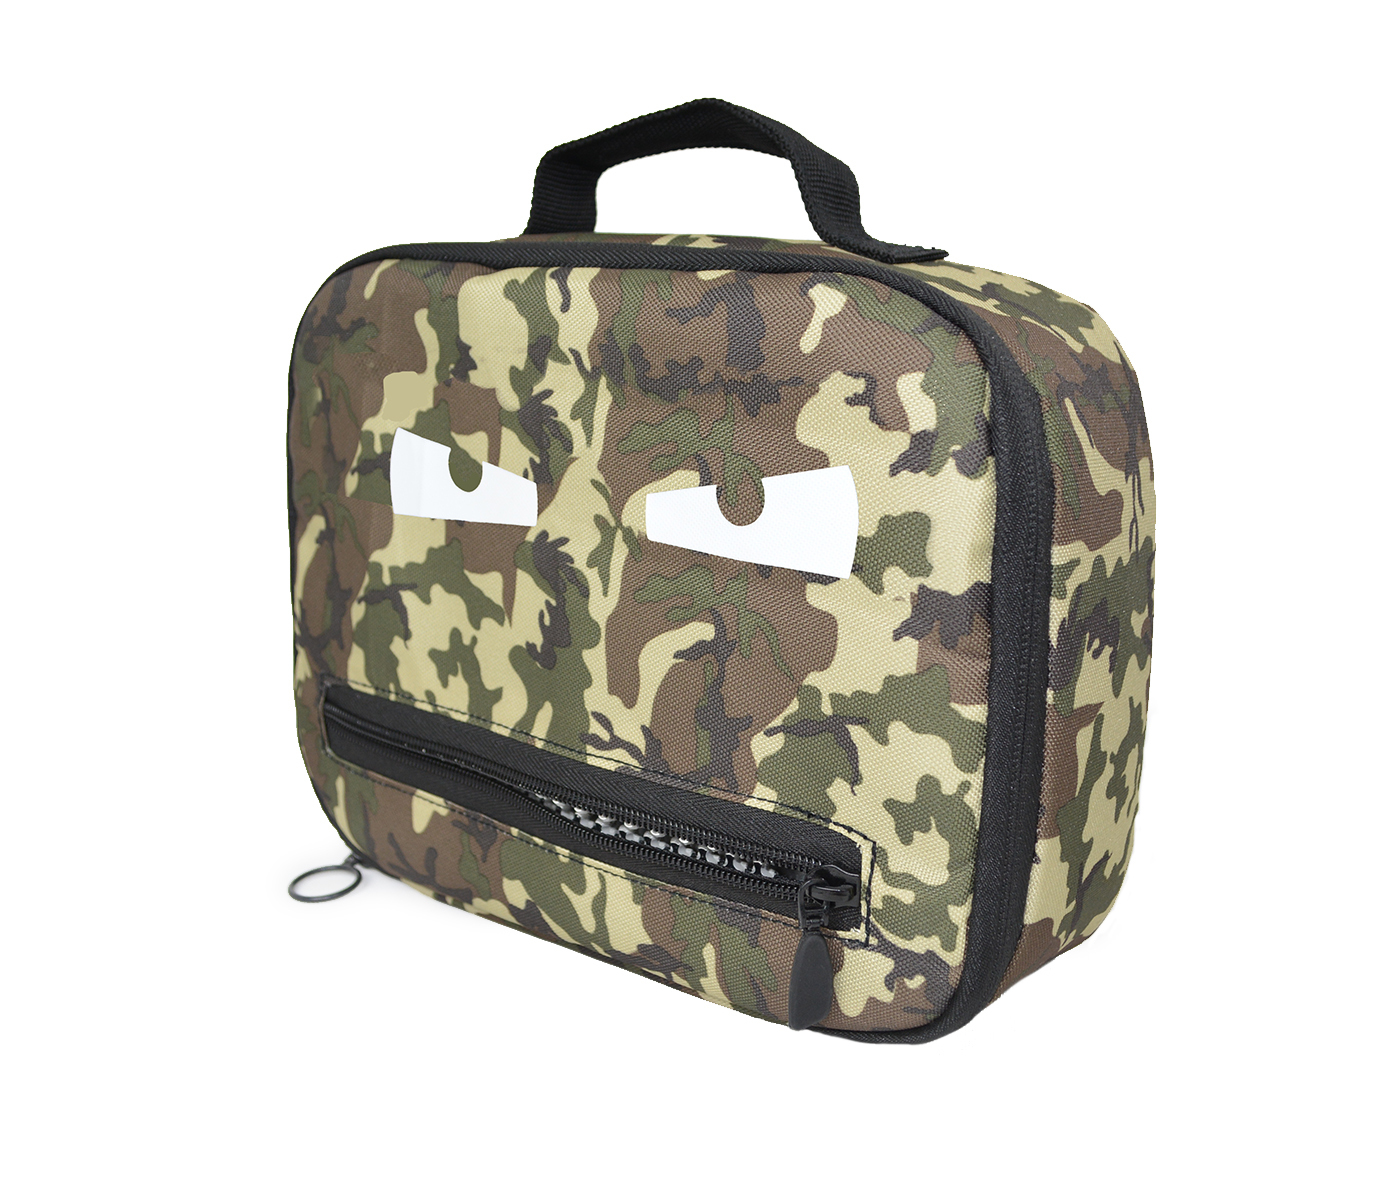 Zipit Grillz Lunch Bag Camo Green – OMG Store - Gifts, Stationery ...